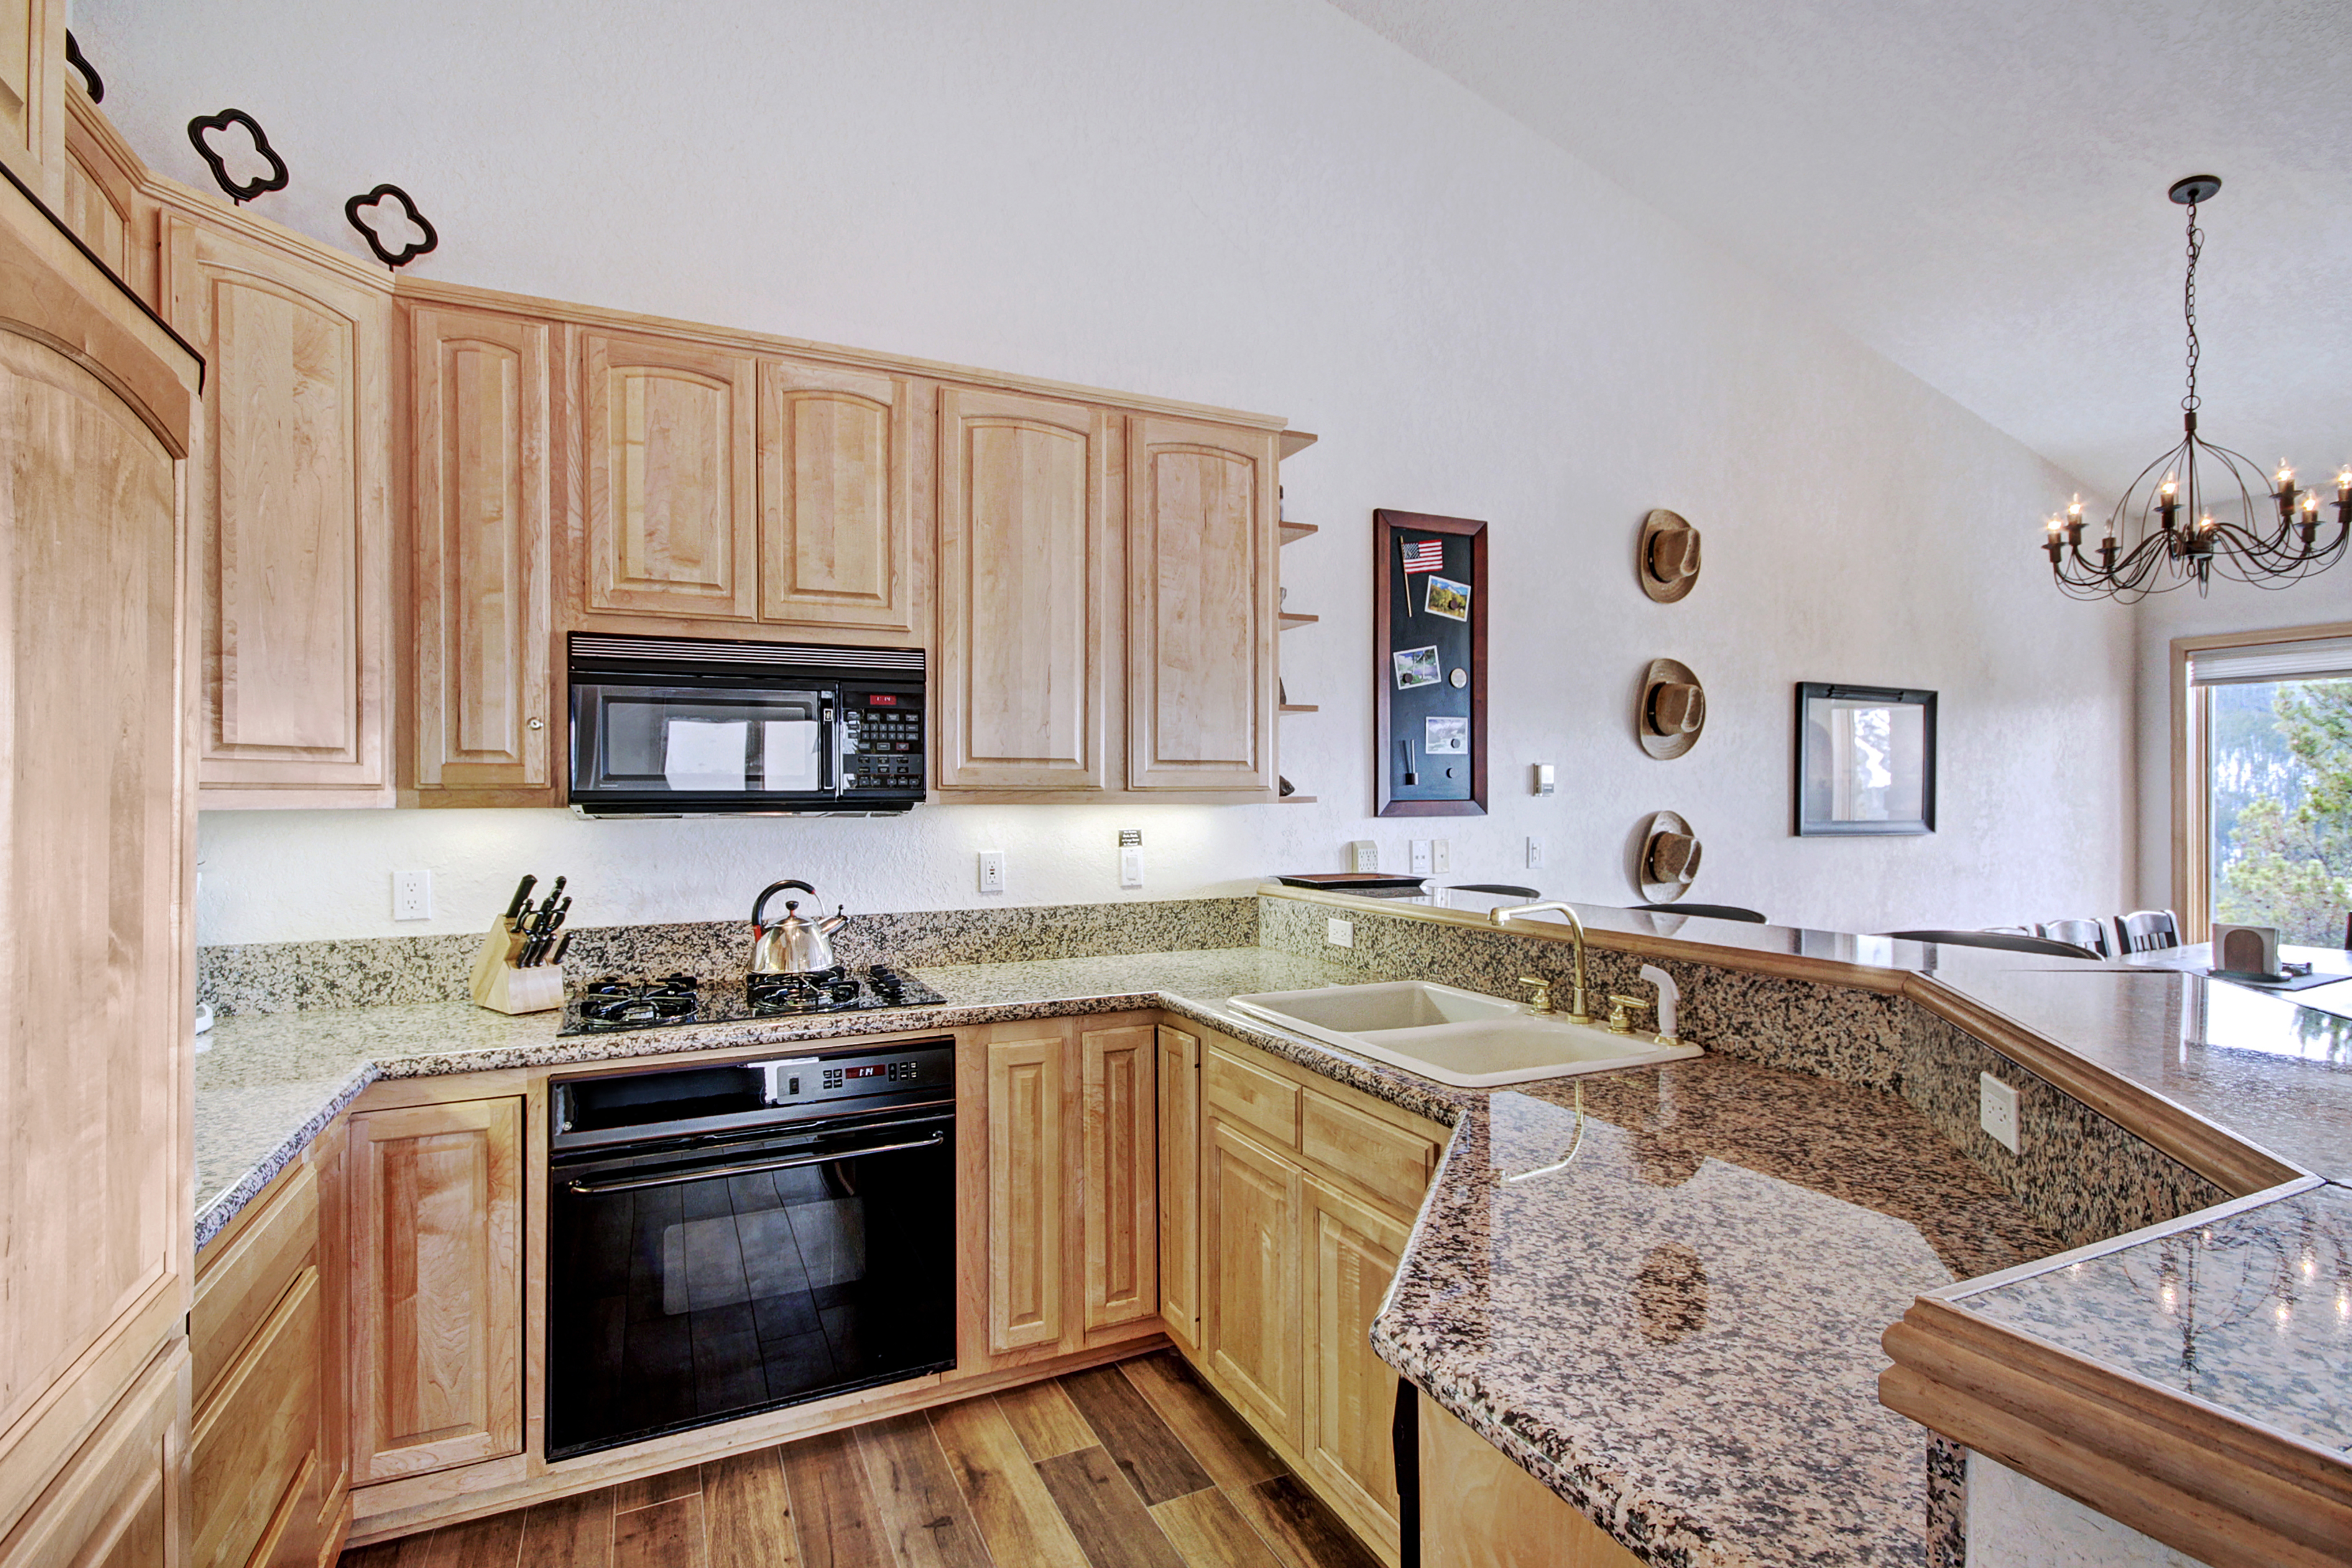 Contemporary kitchen with upgraded appliances and granite counter tops.